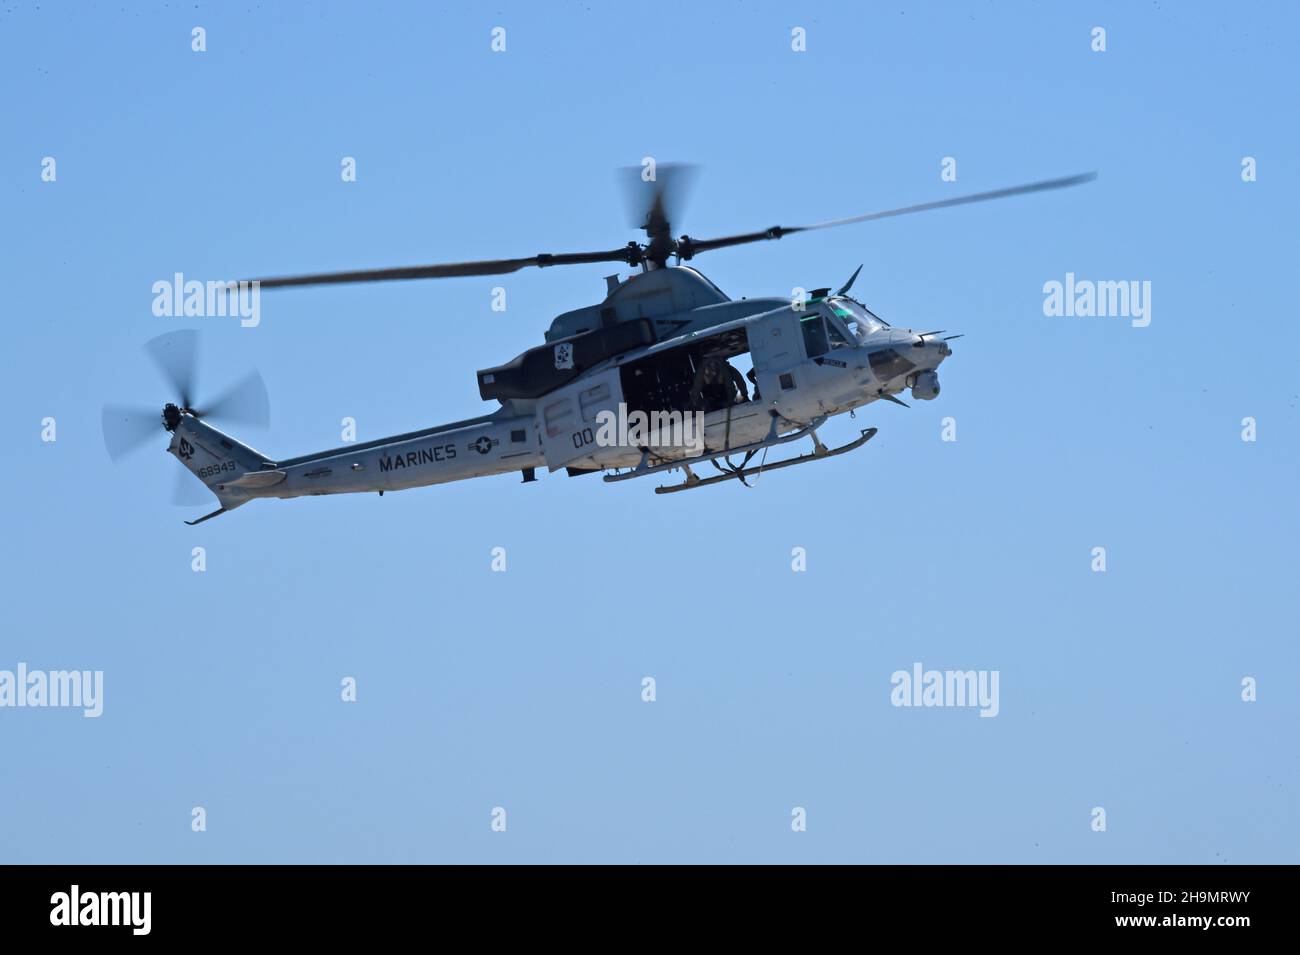 USMC UH-1Y Venom helicopter approaches the LZ during a MAGTF demonstration at MCAS Miramar in San Diego, California. Stock Photo